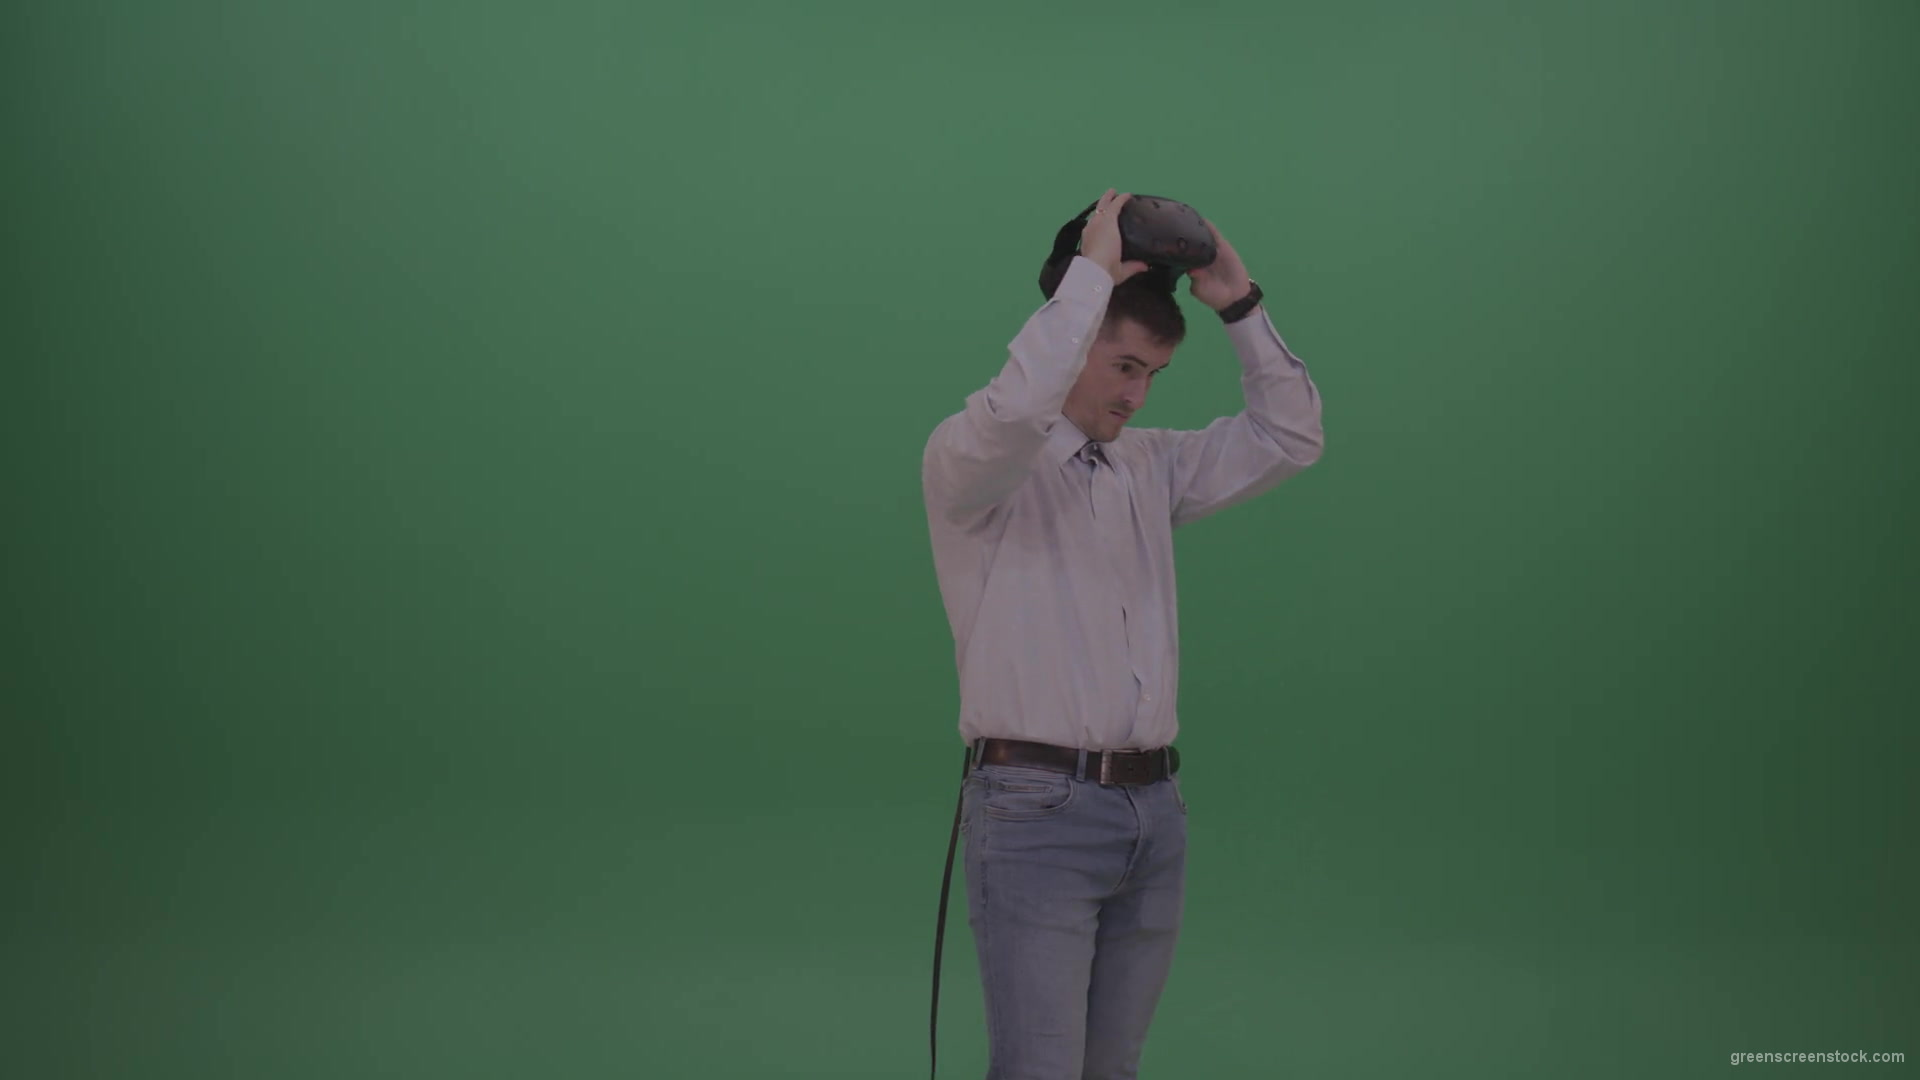 Young_Man_Wearing_White_Shirt_Making_Hard_Decision_Using_Virtual_Glasses_To_Solve_The_Task_Green_Screen_Wall_Chroma_Key_Background-1920_008 Green Screen Stock